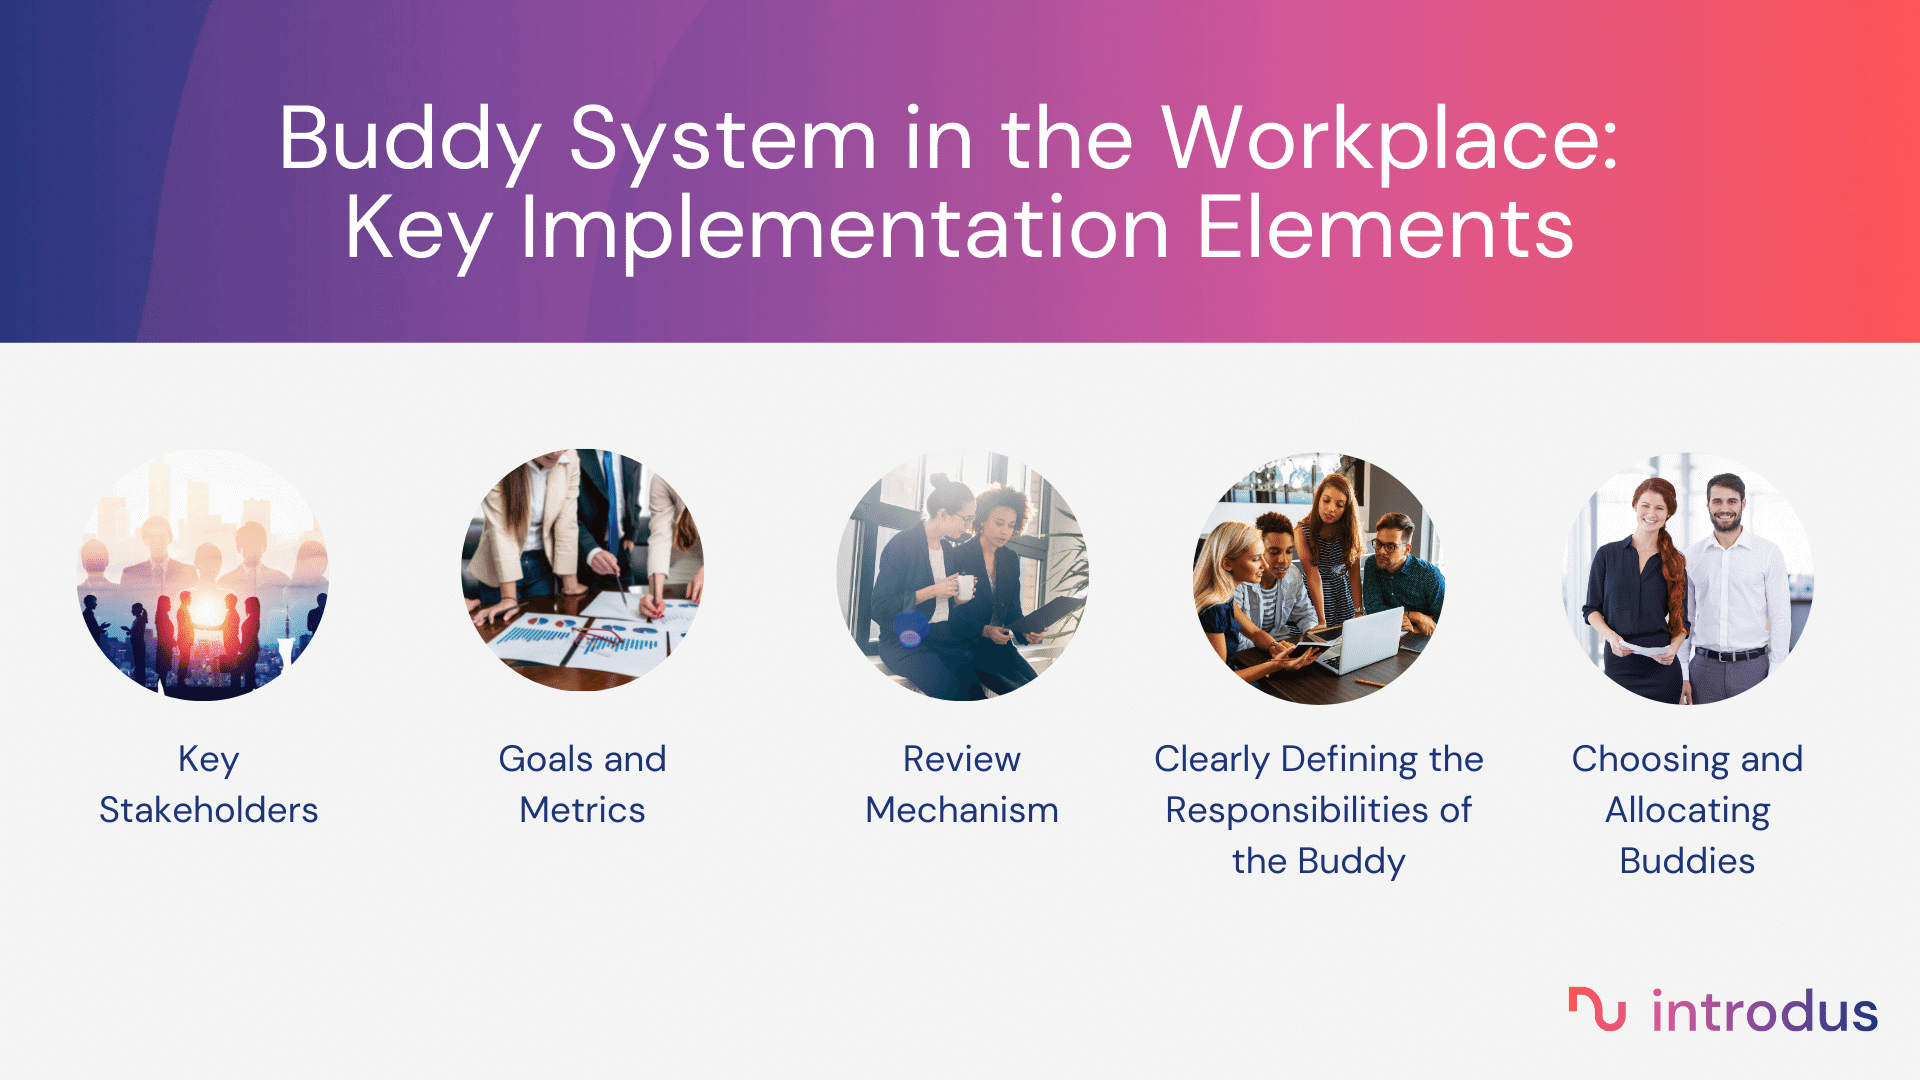 How to Implement a Work Buddy System?